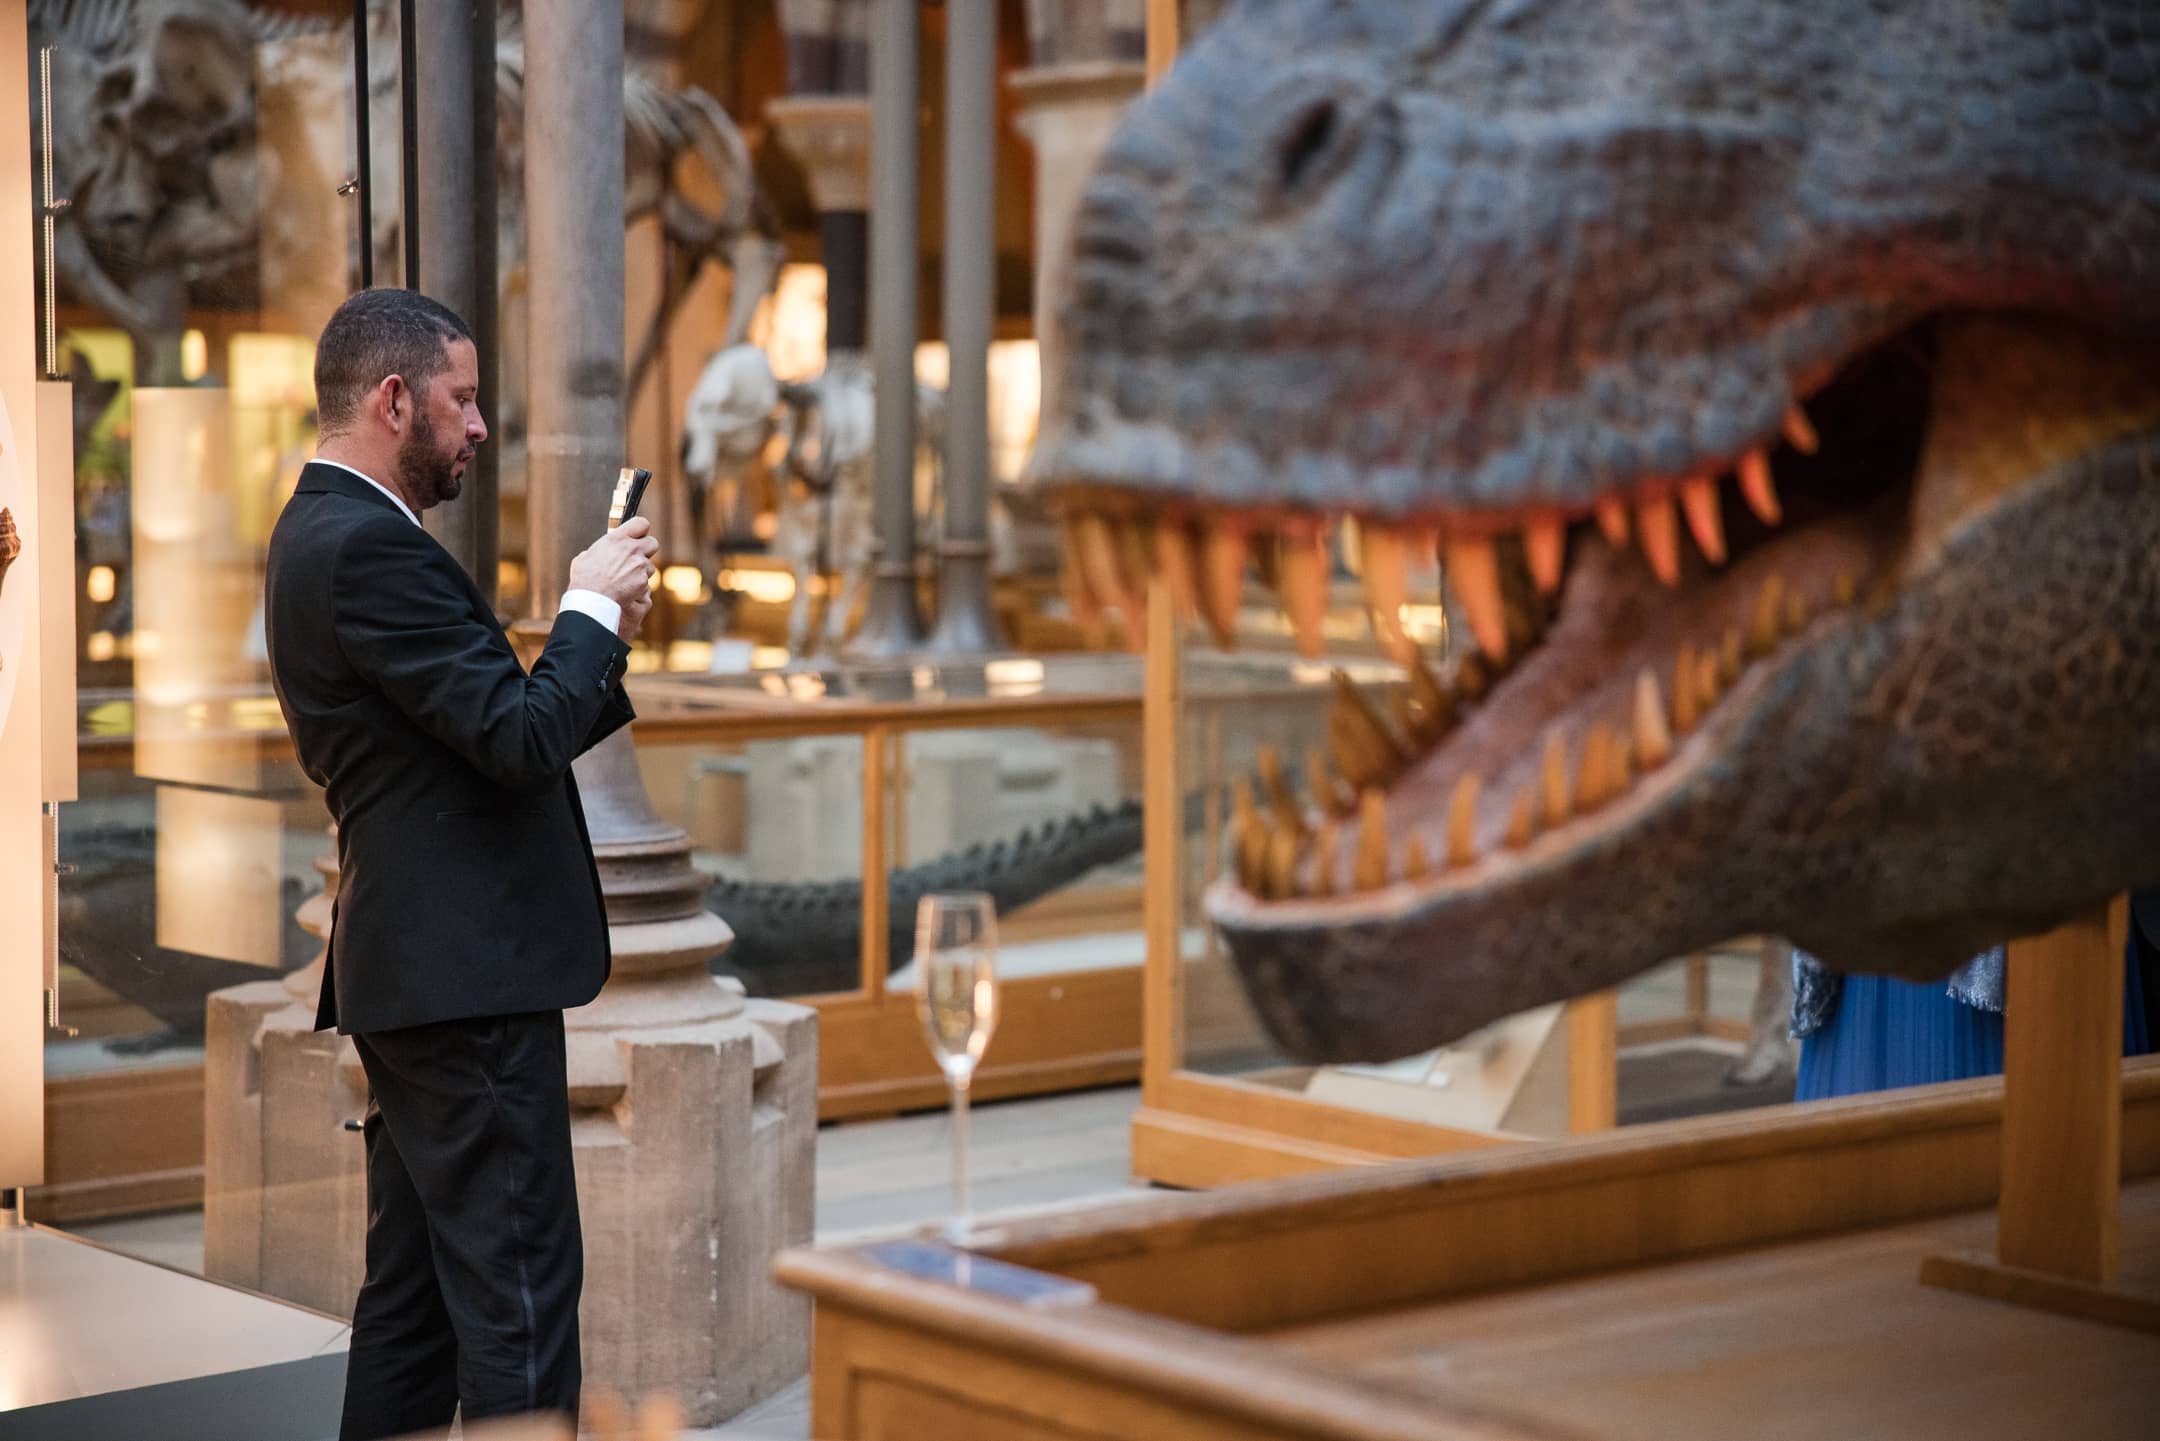 Guest on phone with dinosaur looking on, at the Oxford Natural History Museum wedding reception